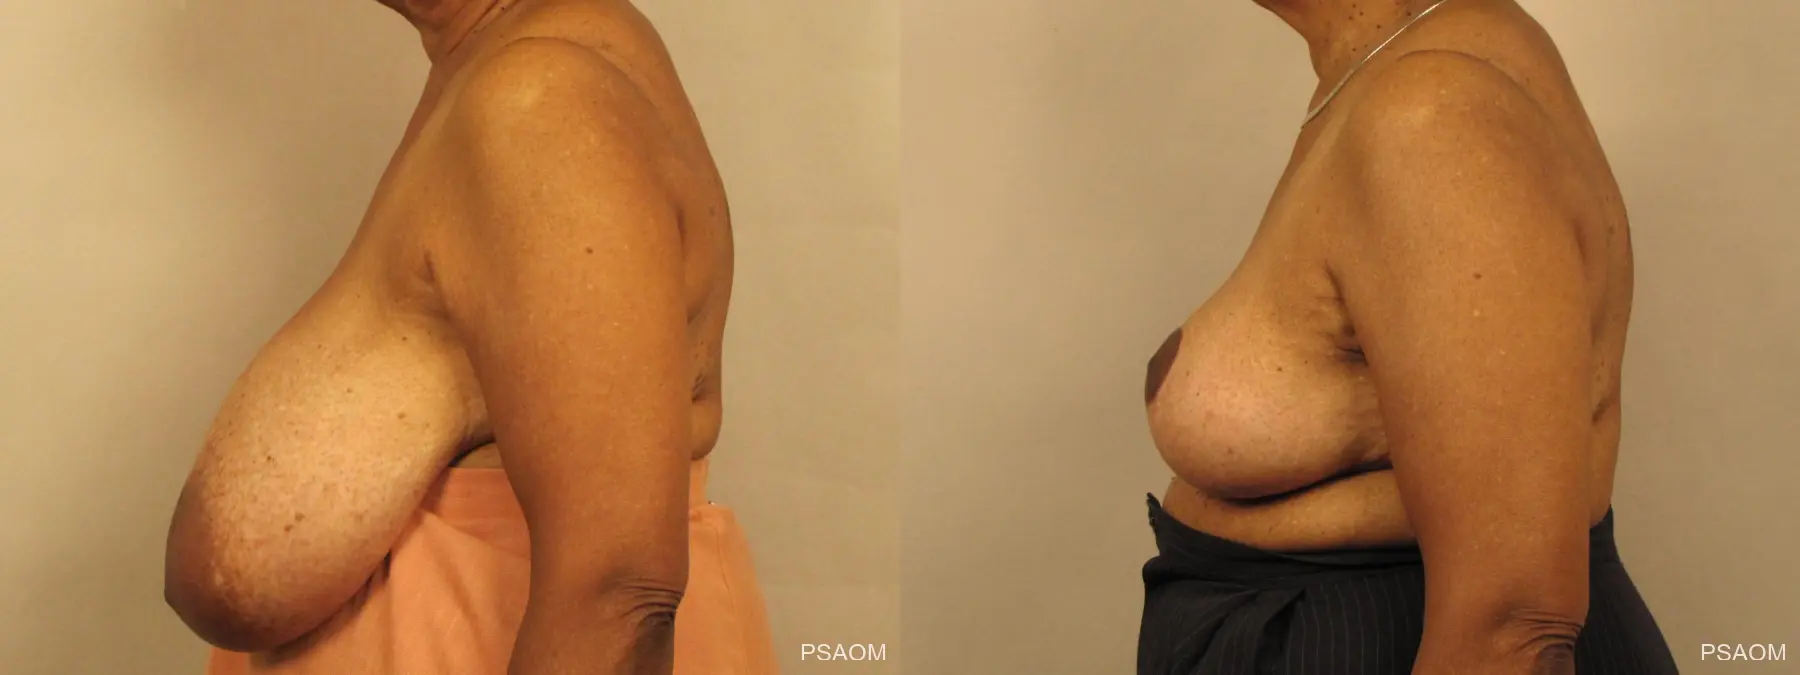 Breast Reduction: Patient 1 - Before and After 2